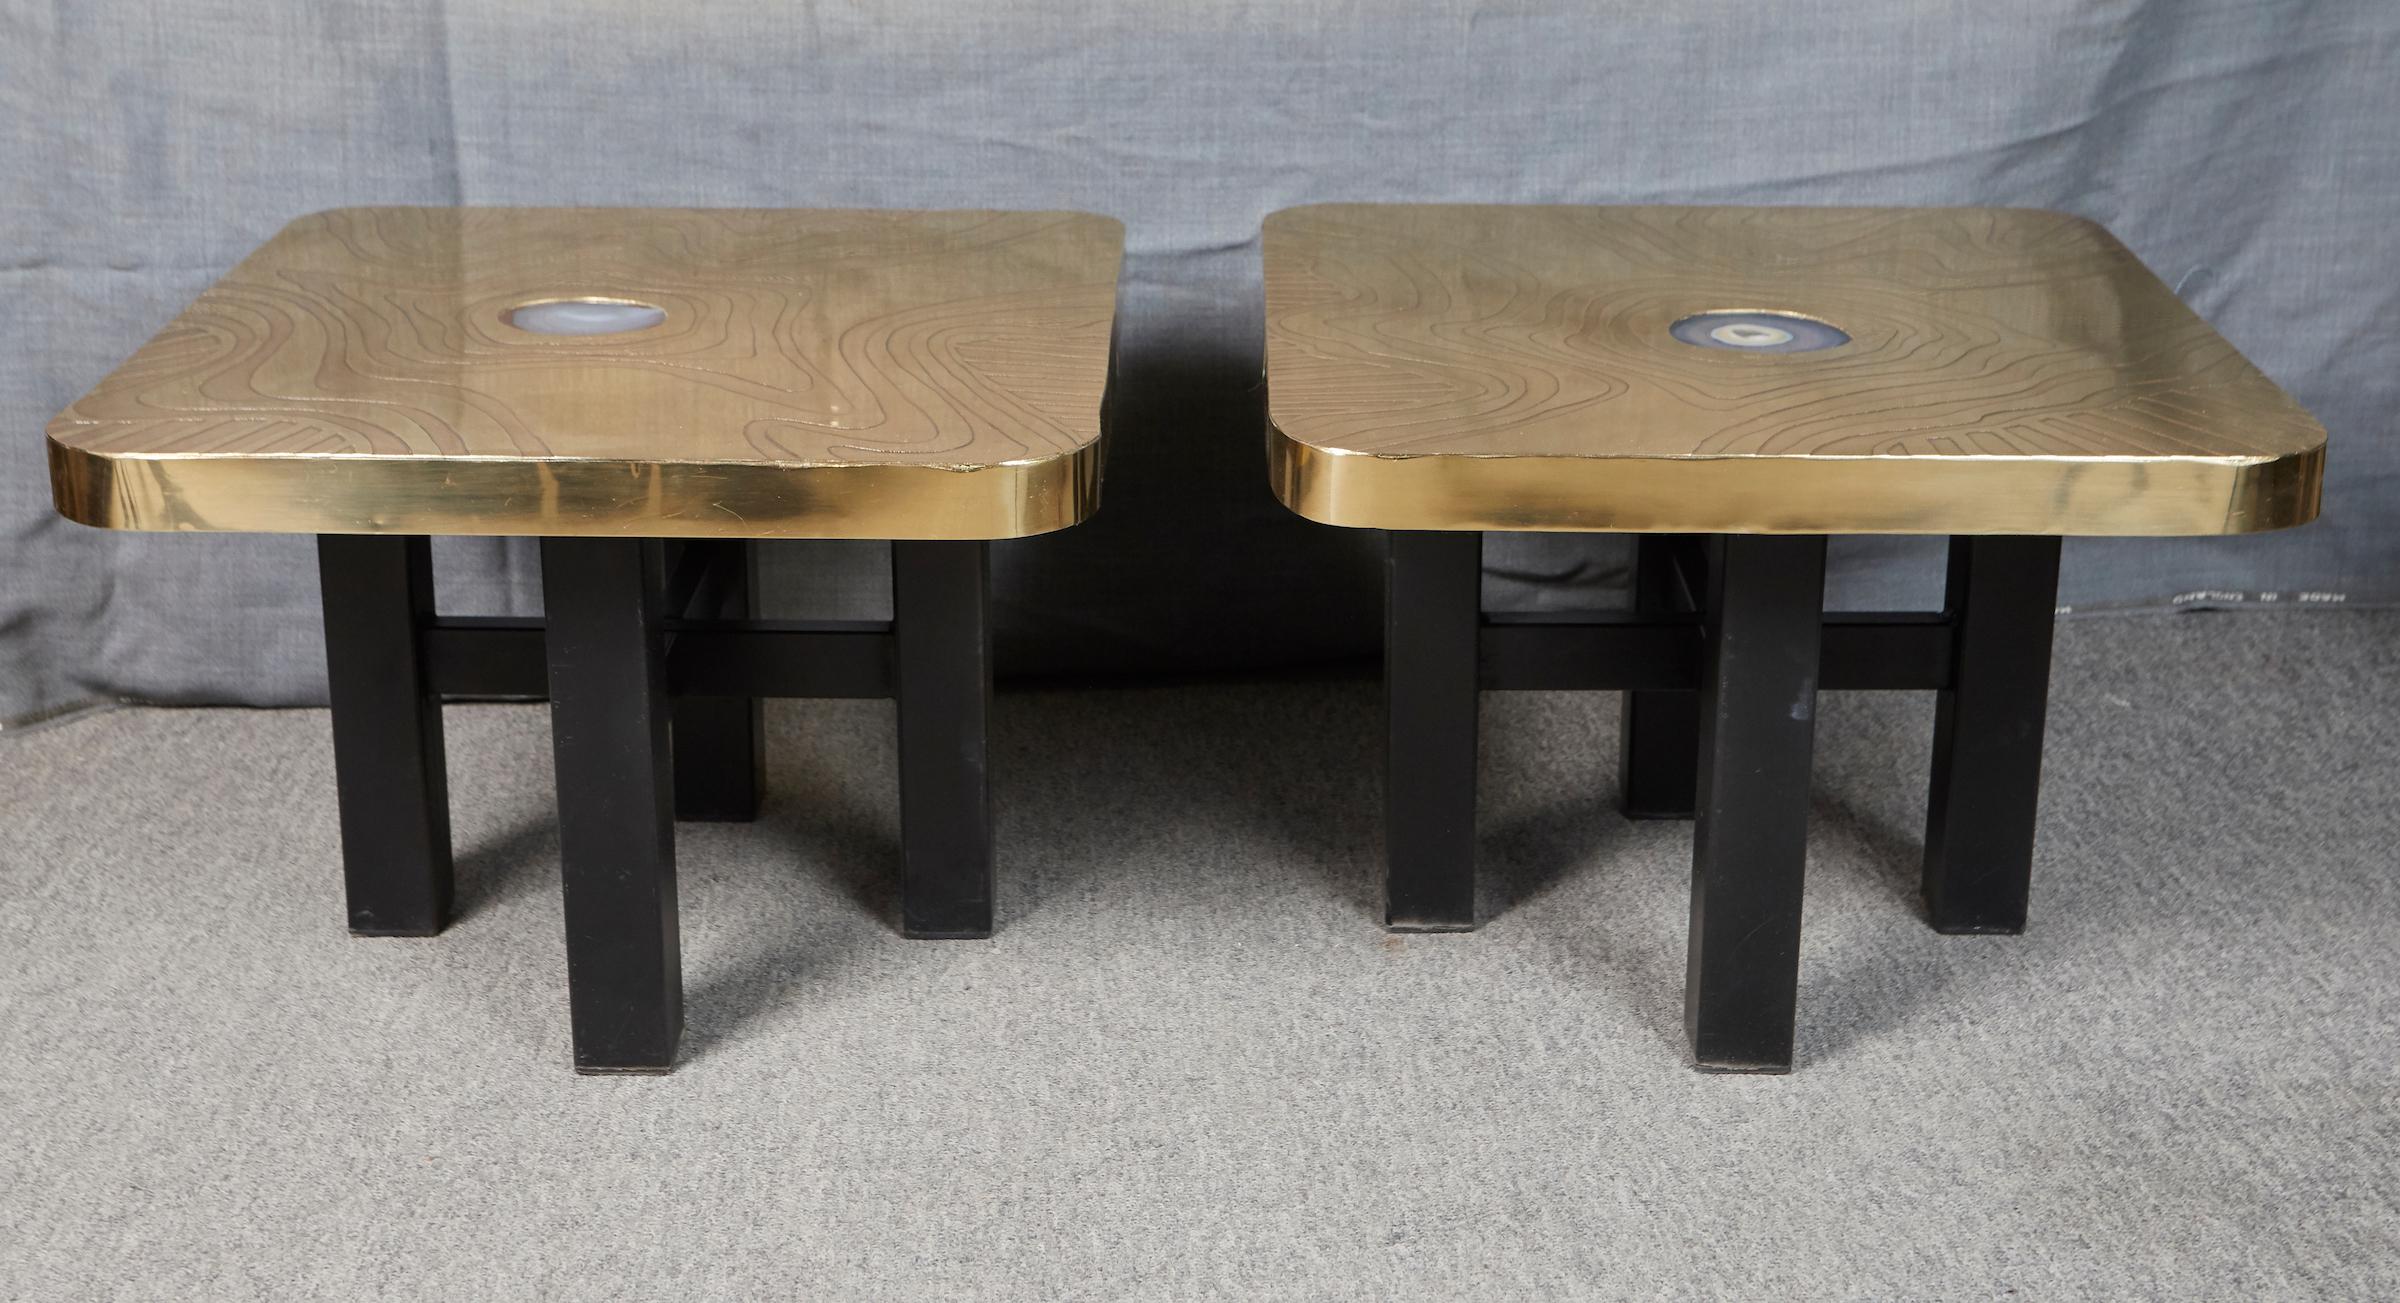 Elegant pair of highly polished brass end tables with inset agate decorations by Georges Mathias.